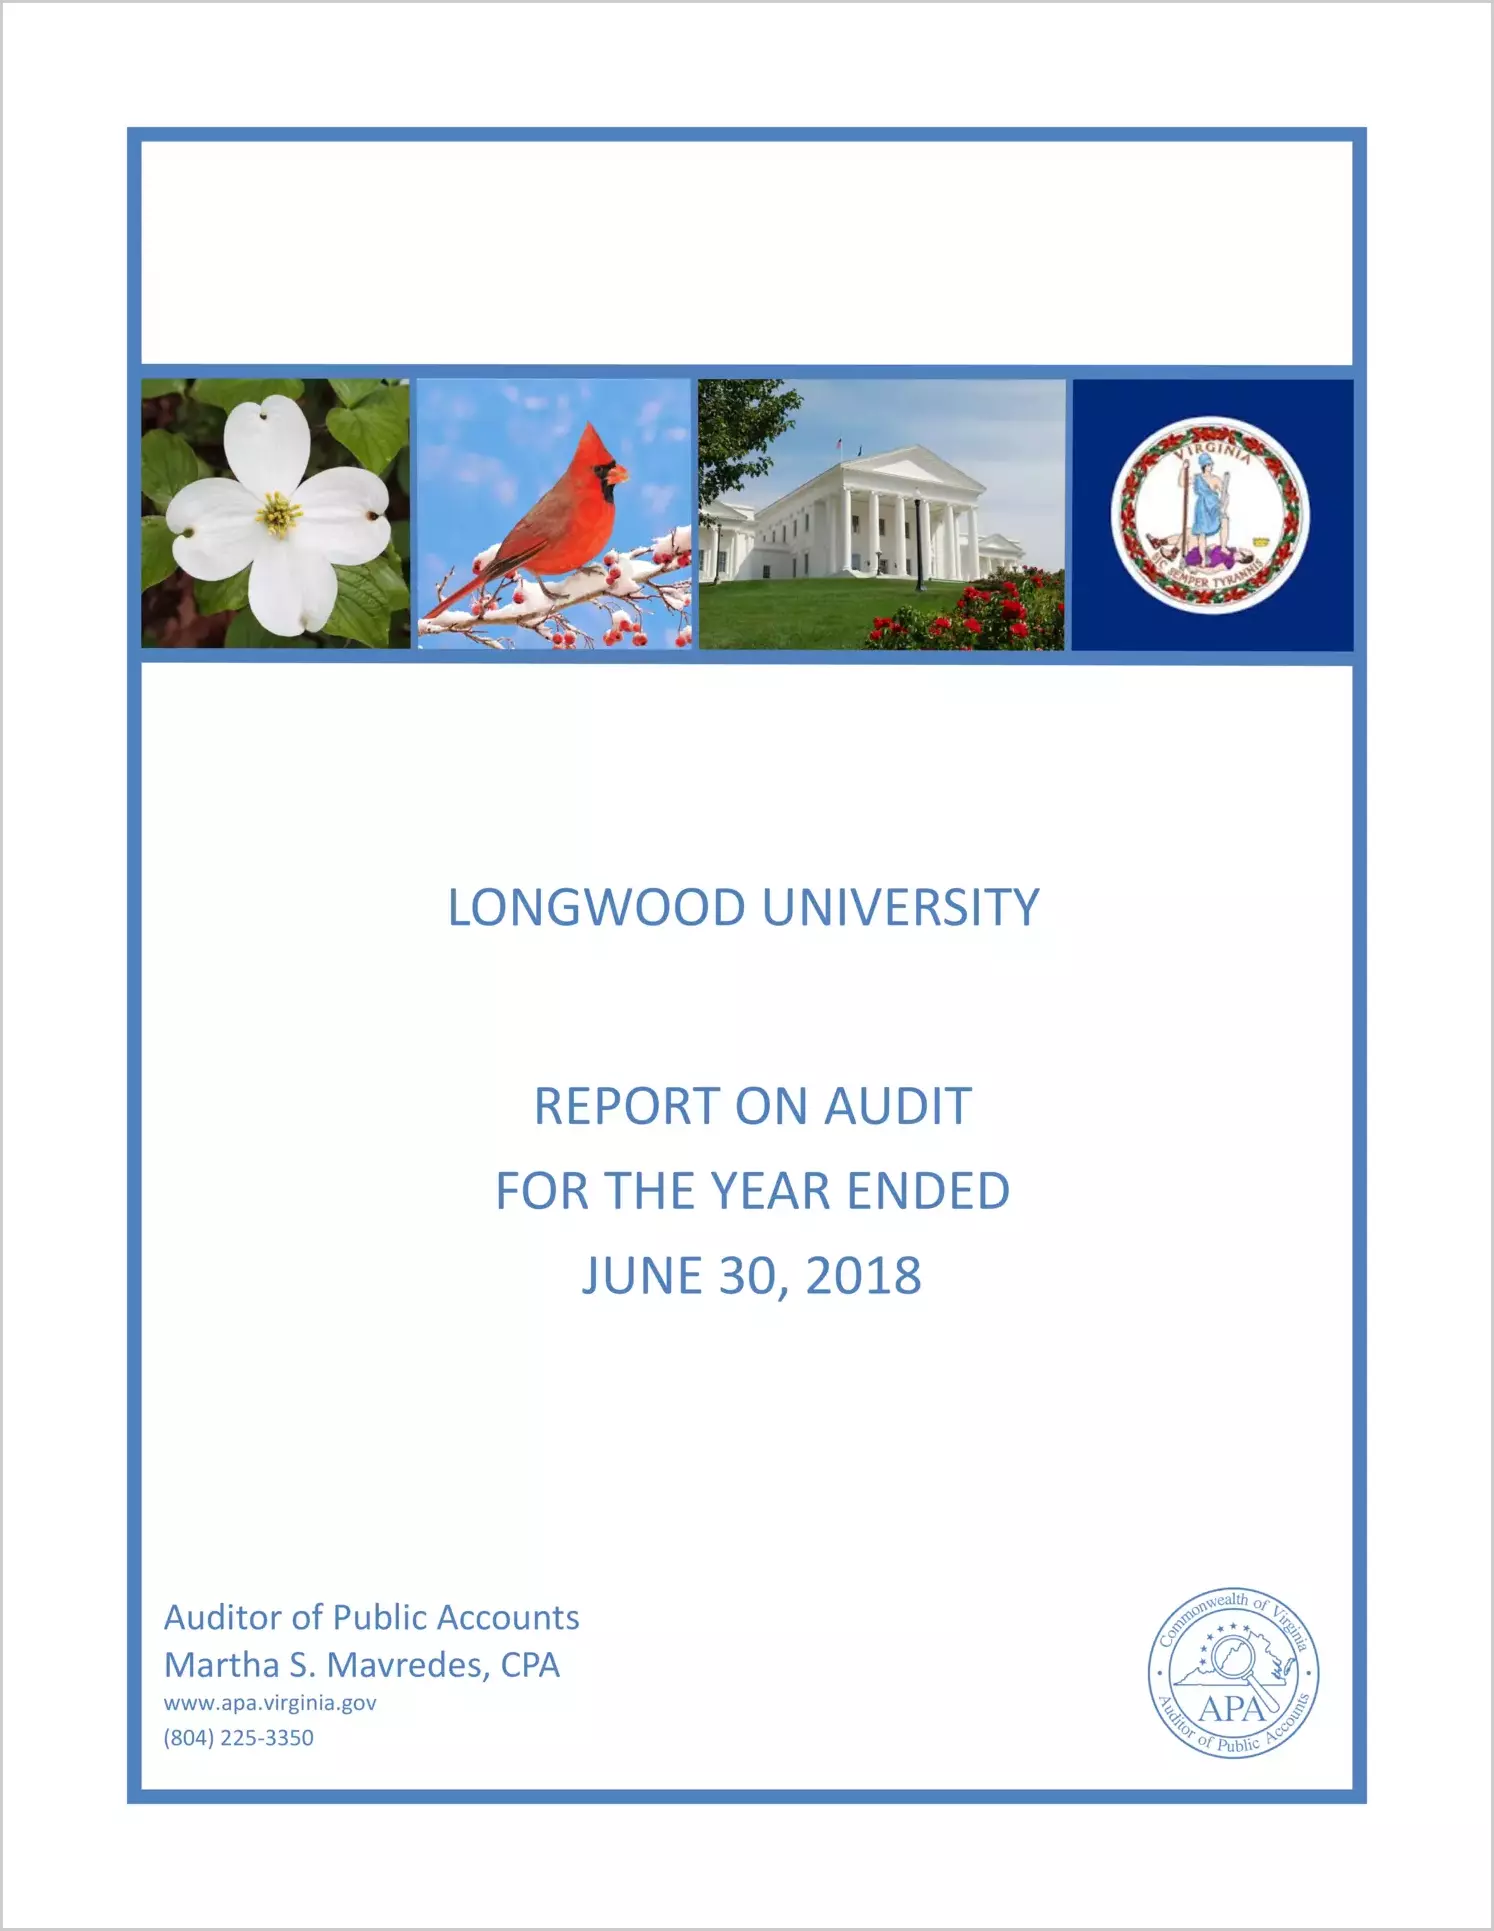 Longwood University for the year ended June 30, 2018